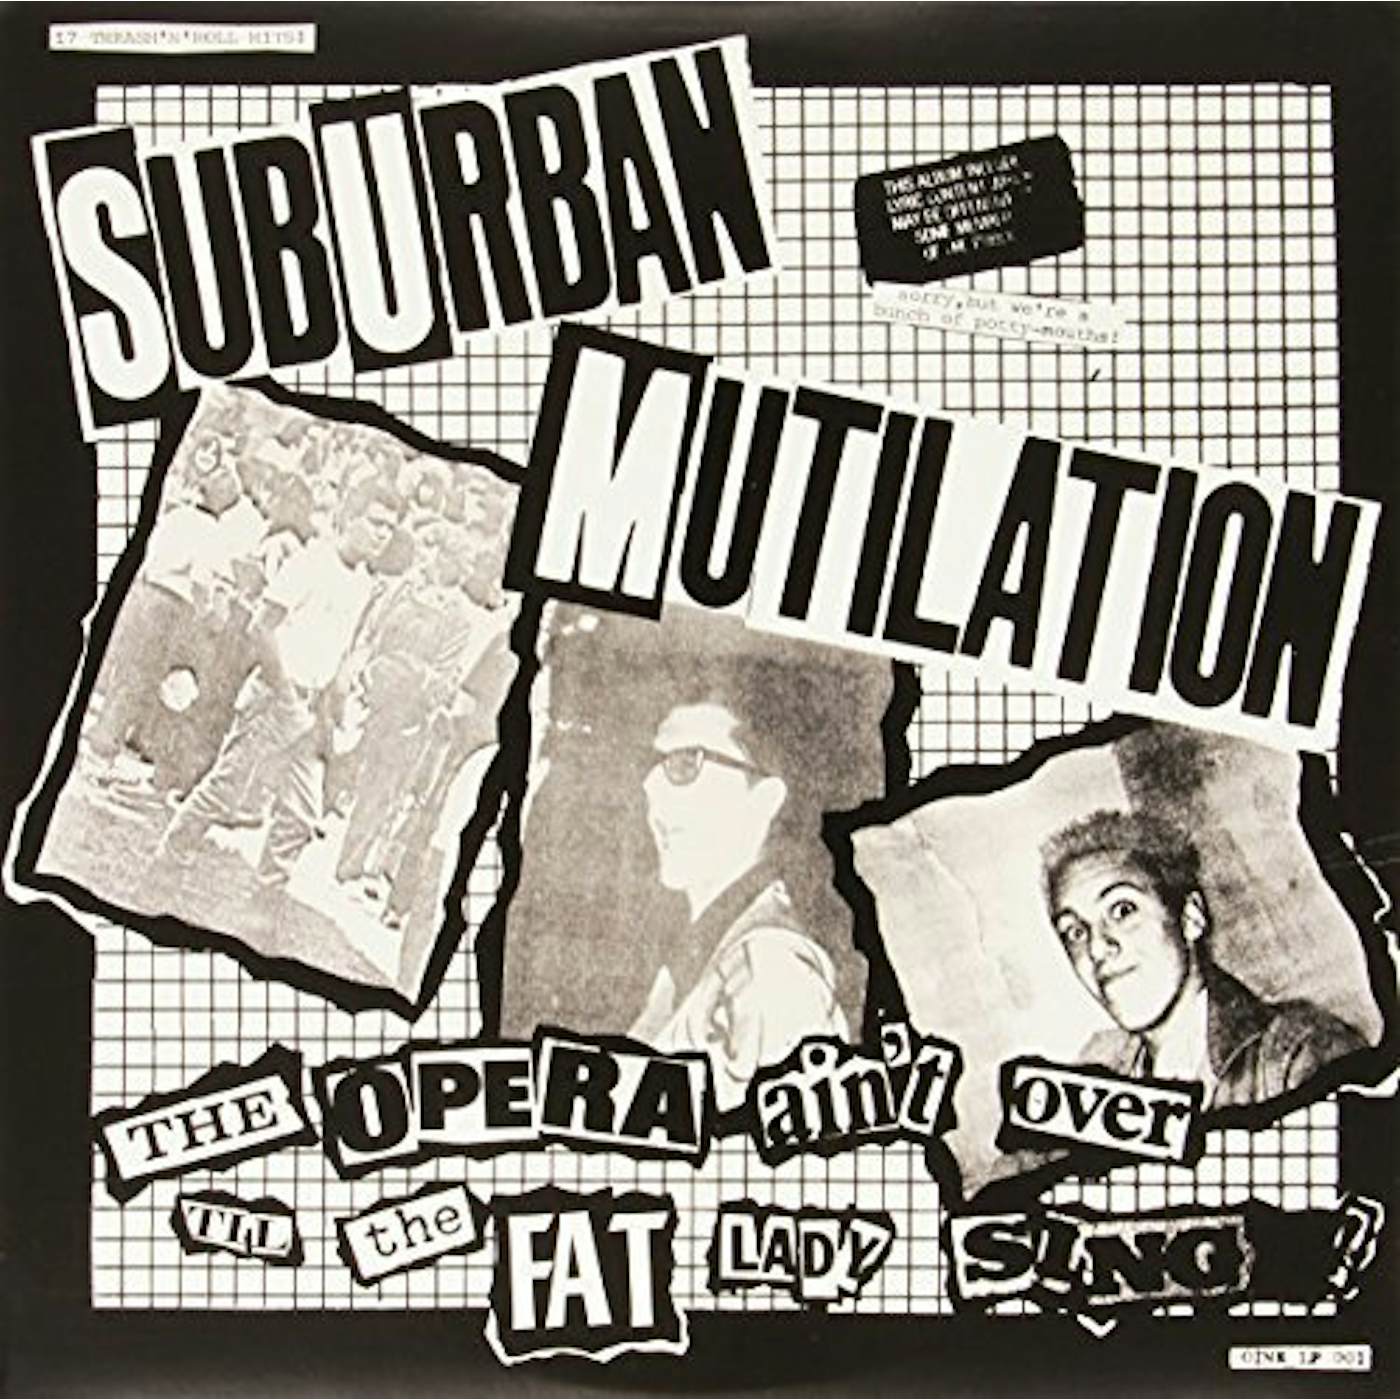 Suburban Mutilation OPERA AIN'T OVER TIL THE FAT LADY SINGS Vinyl Record